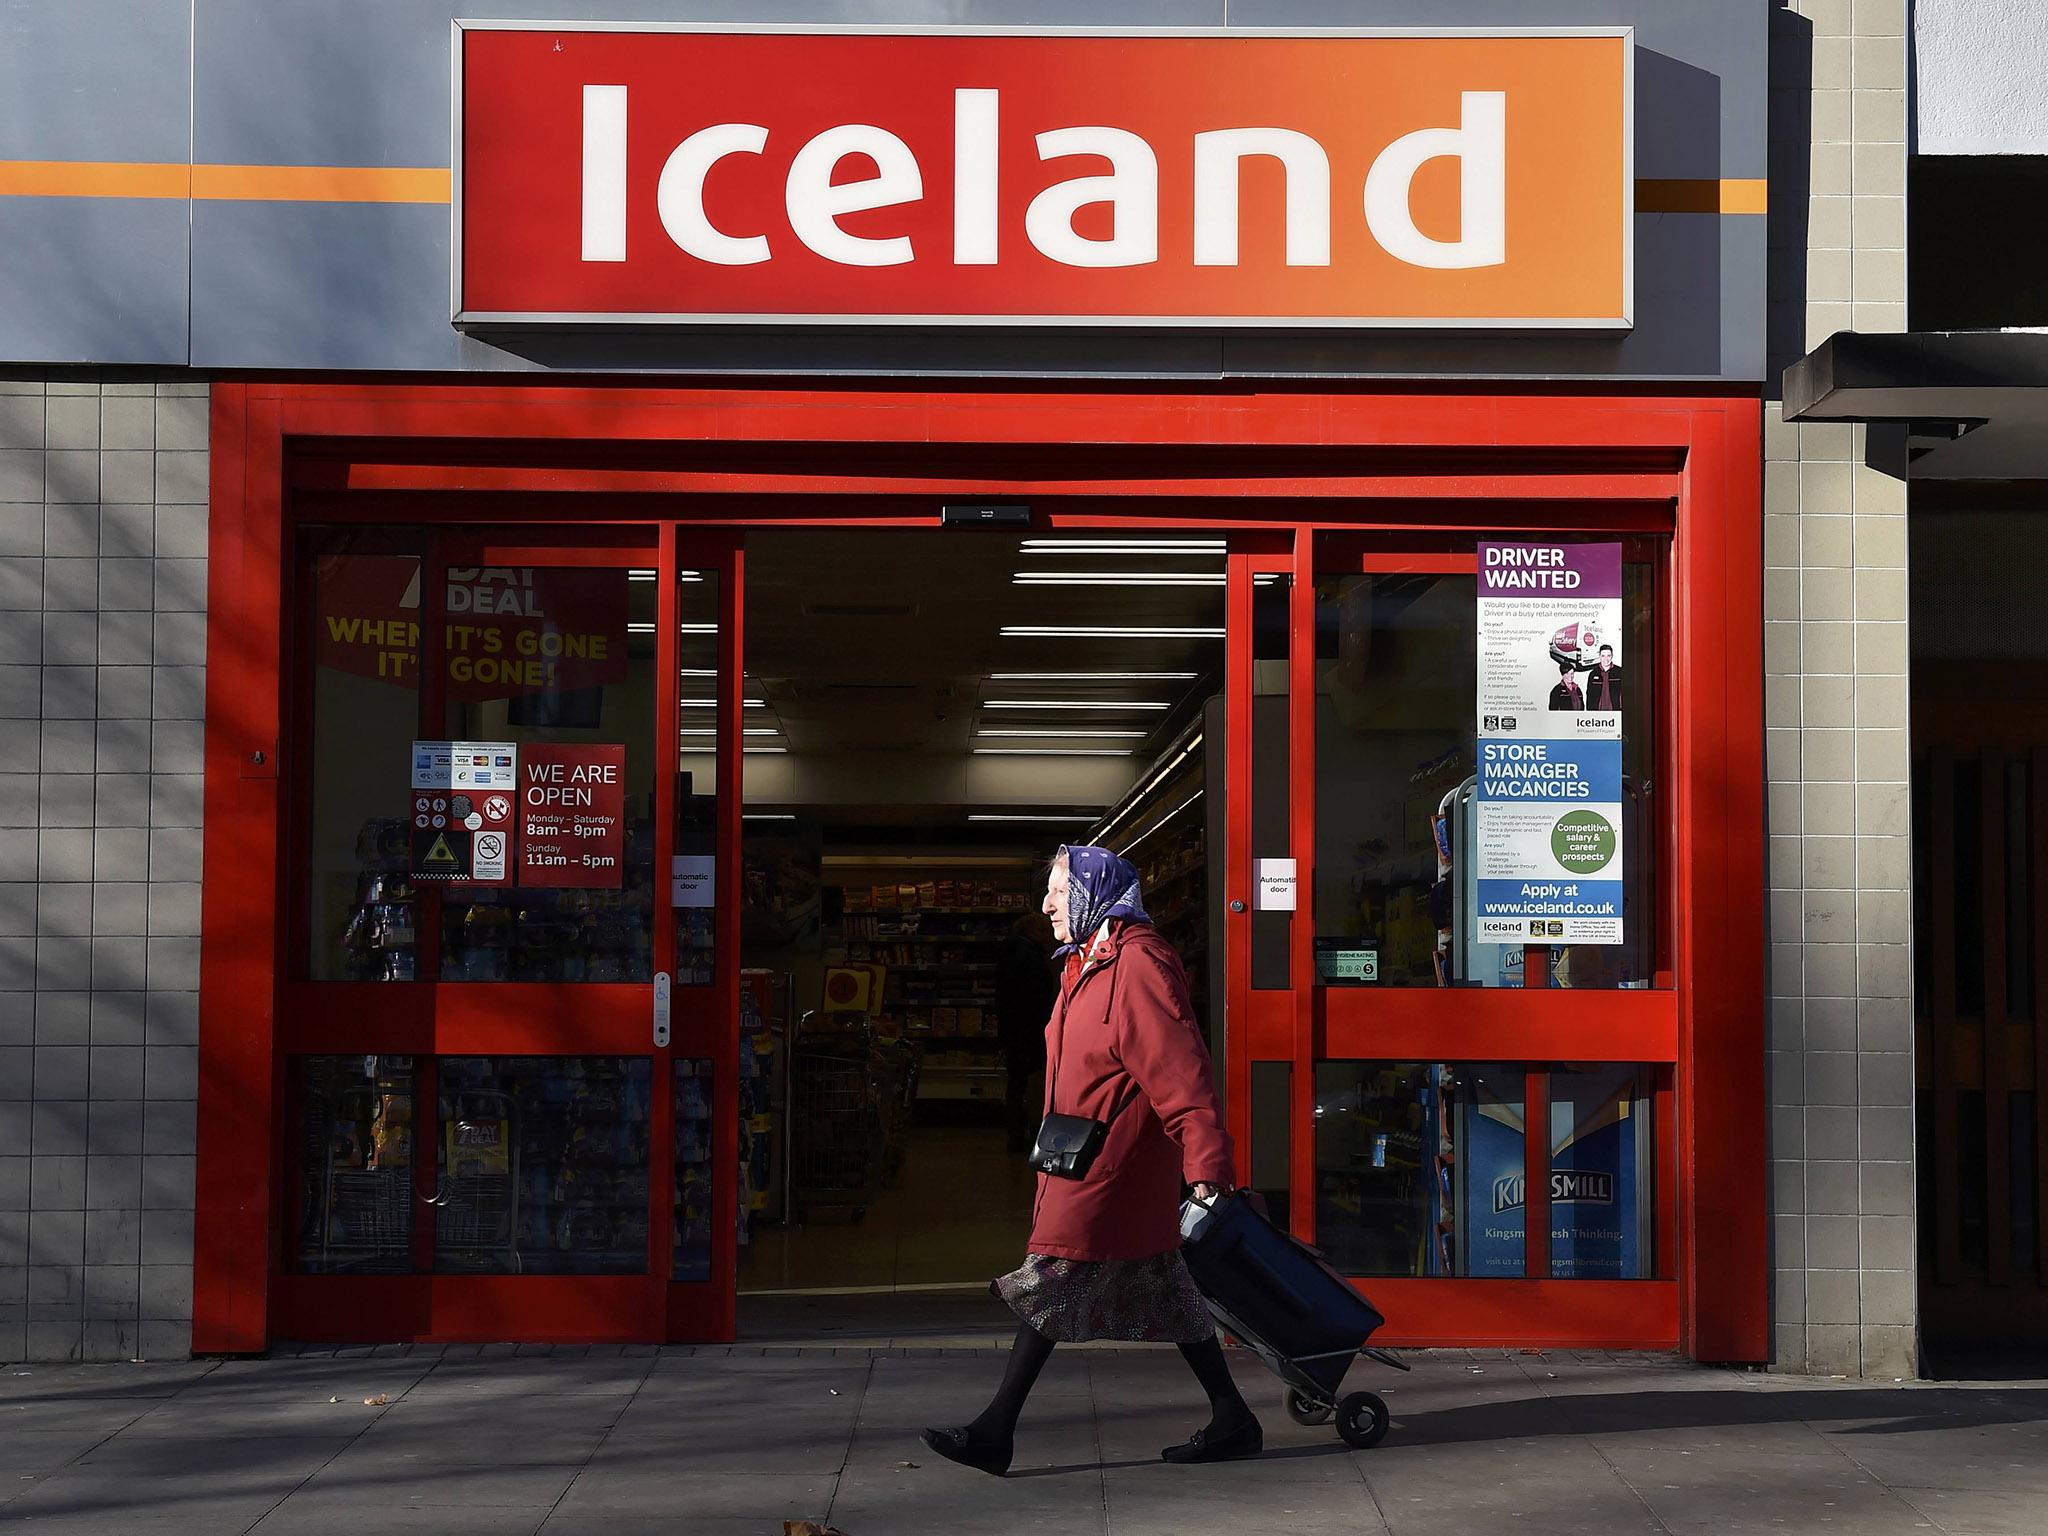 The loan scheme is on offer for Iceland customers to spread the cost of grocery bills